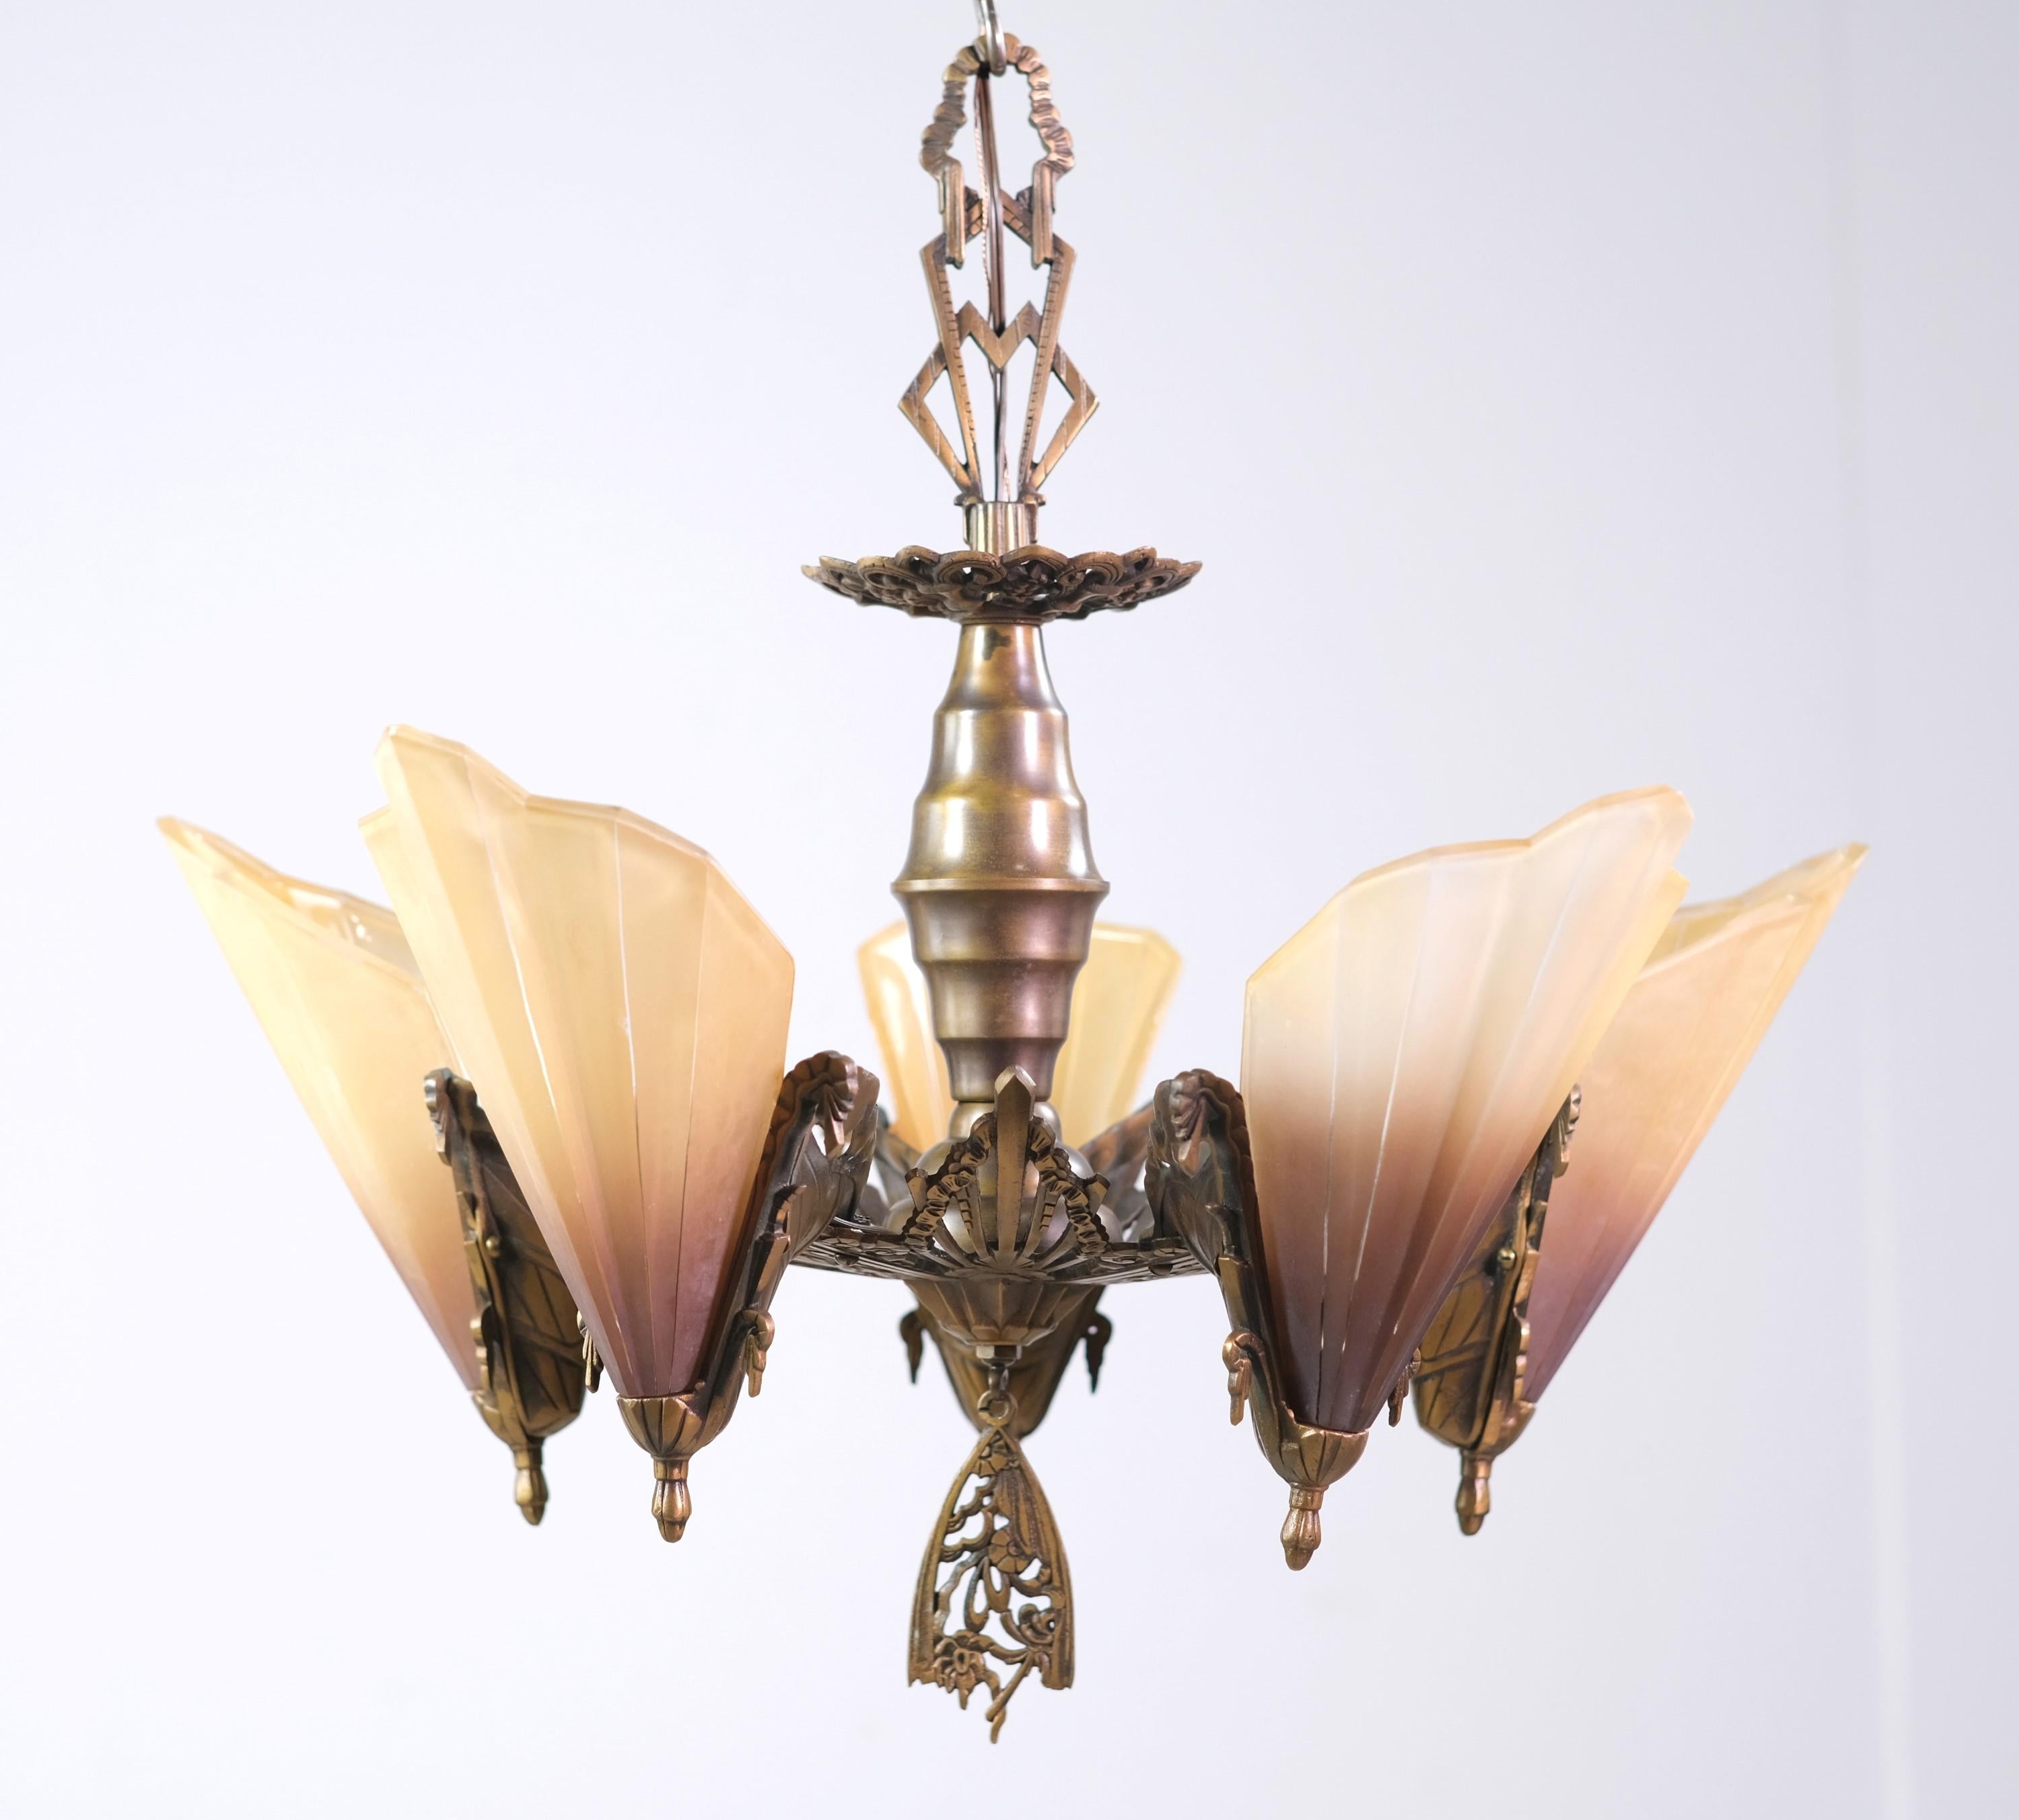 Art Deco 5 light cast bronze chandelier with slip shades. Ornate details with swag, ribbon, and floral motifs. Cleaned and restored. There is minor wear in the paint. Please see the photos.Please note, this item is located in one of our NYC